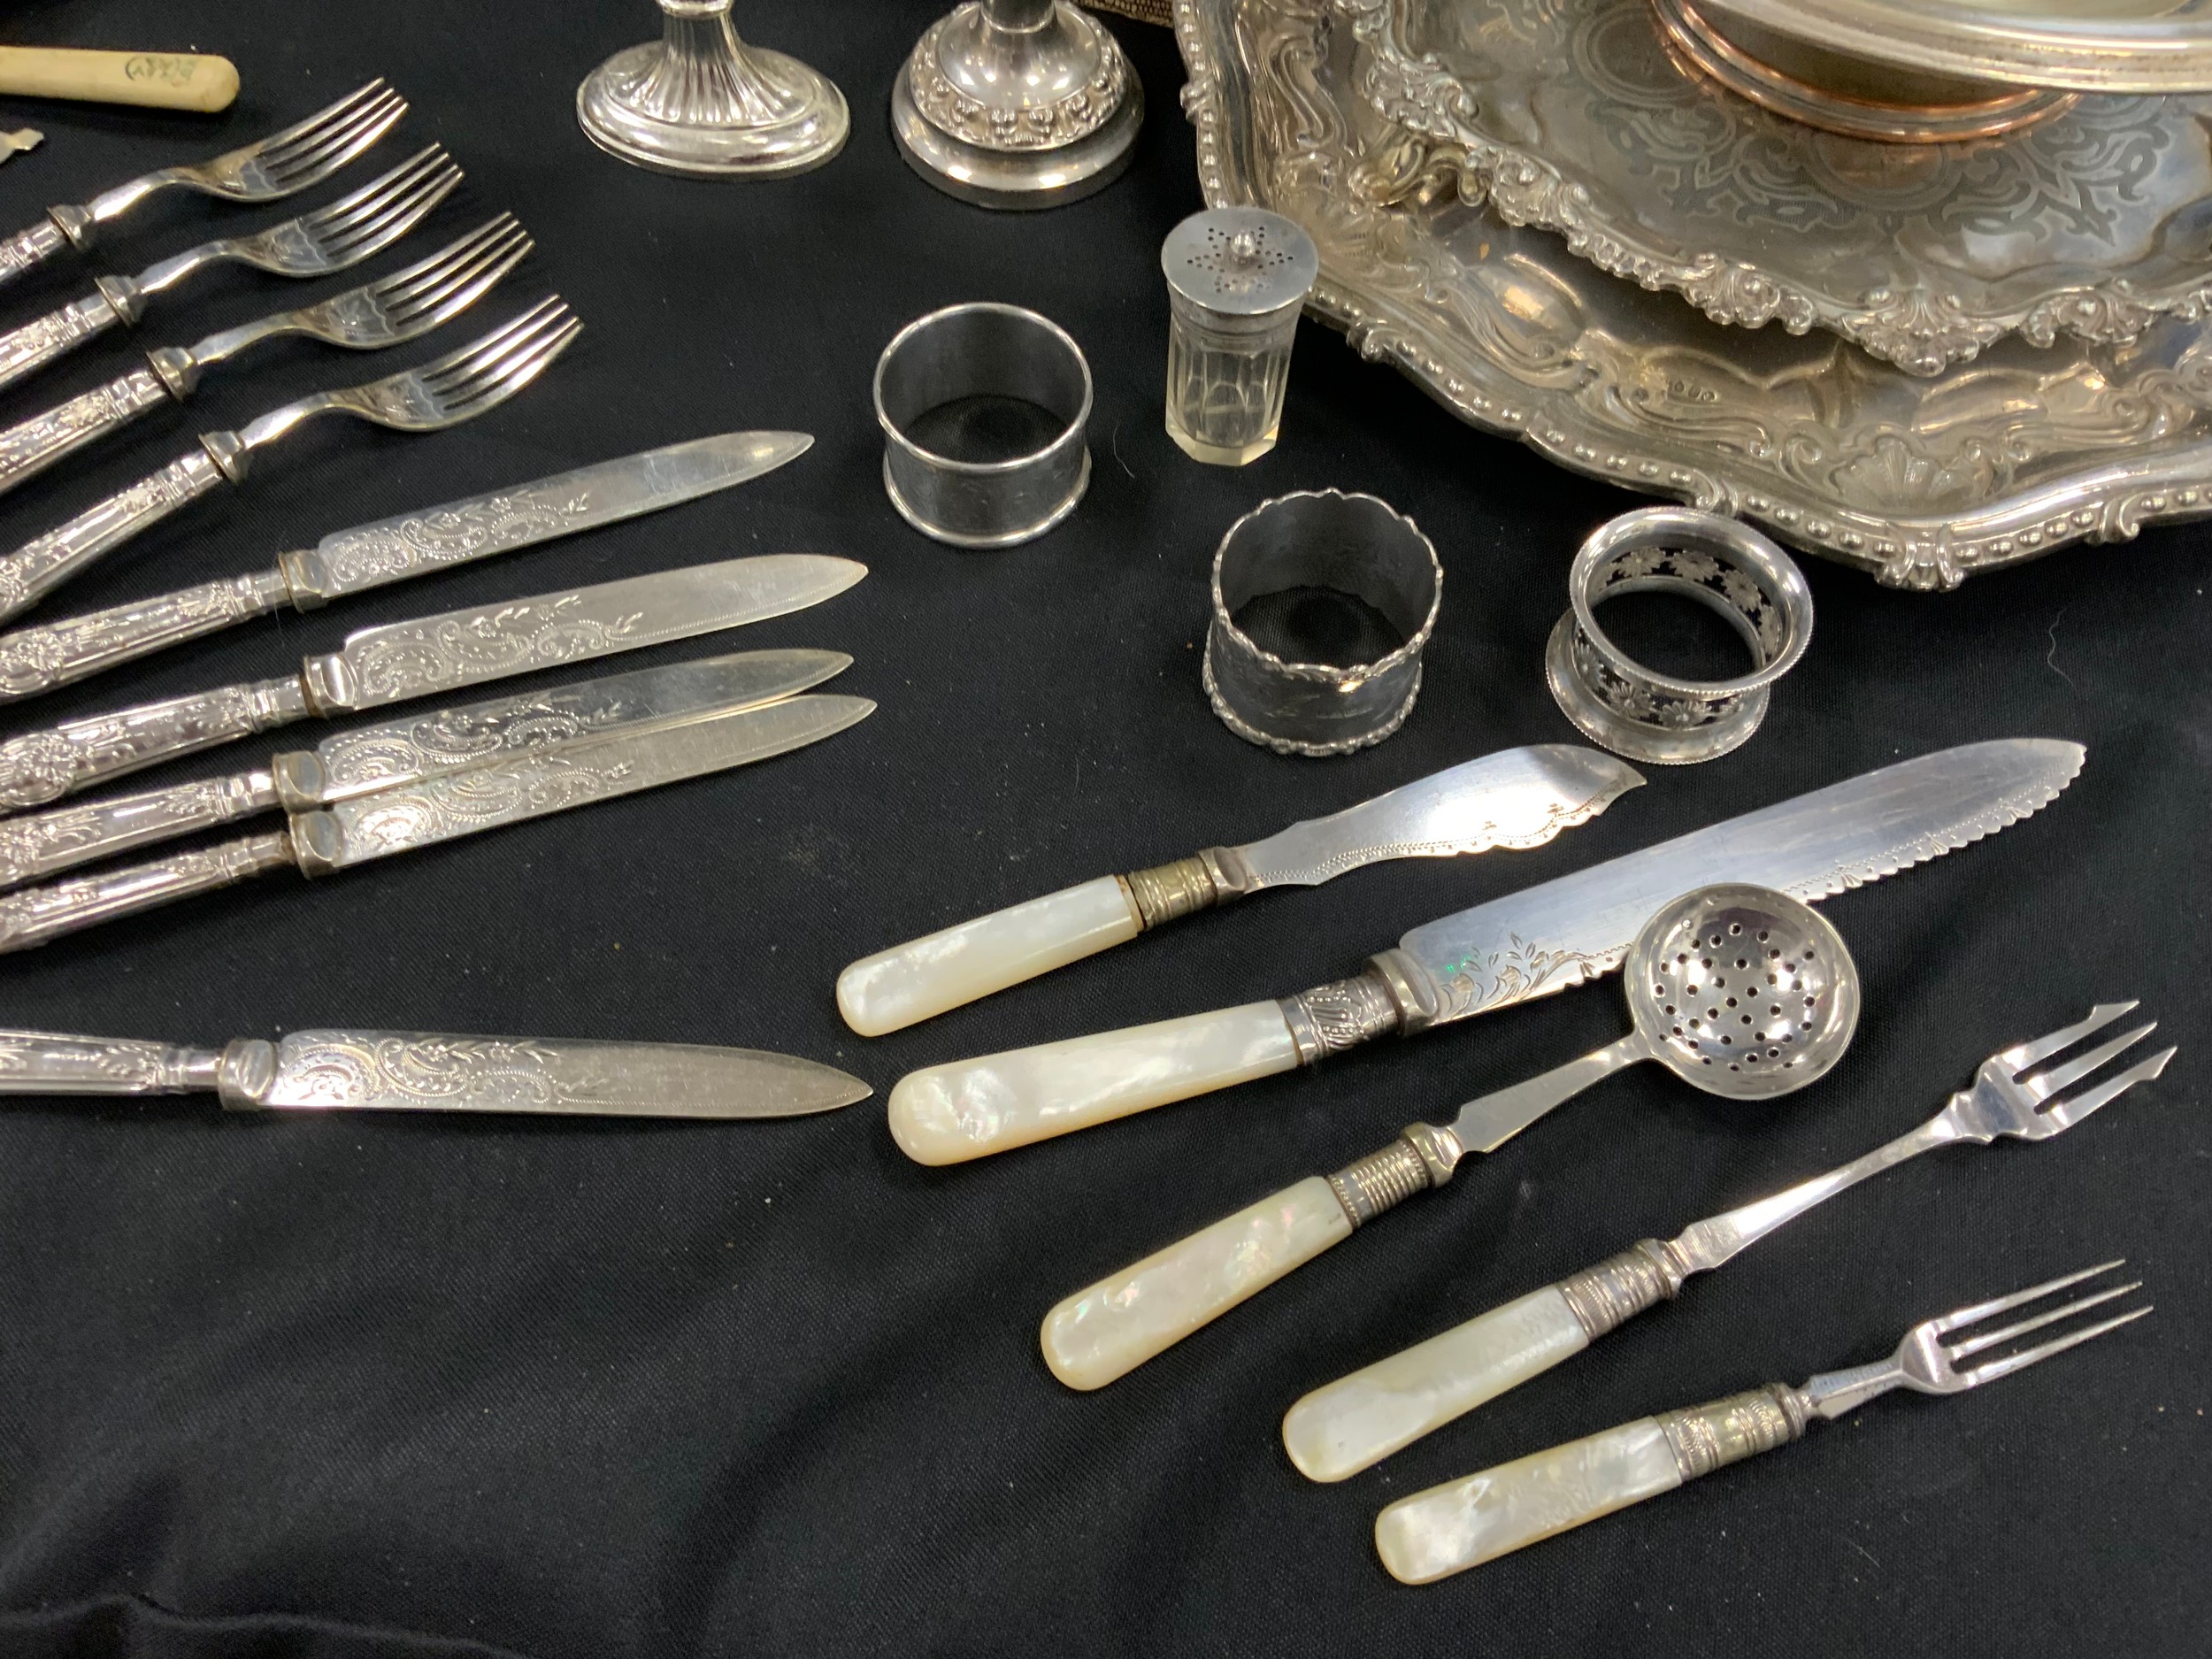 Plated ware - candlabrum, silver napkin rings, silver handled knives and fork, flatware; etc - Image 4 of 4